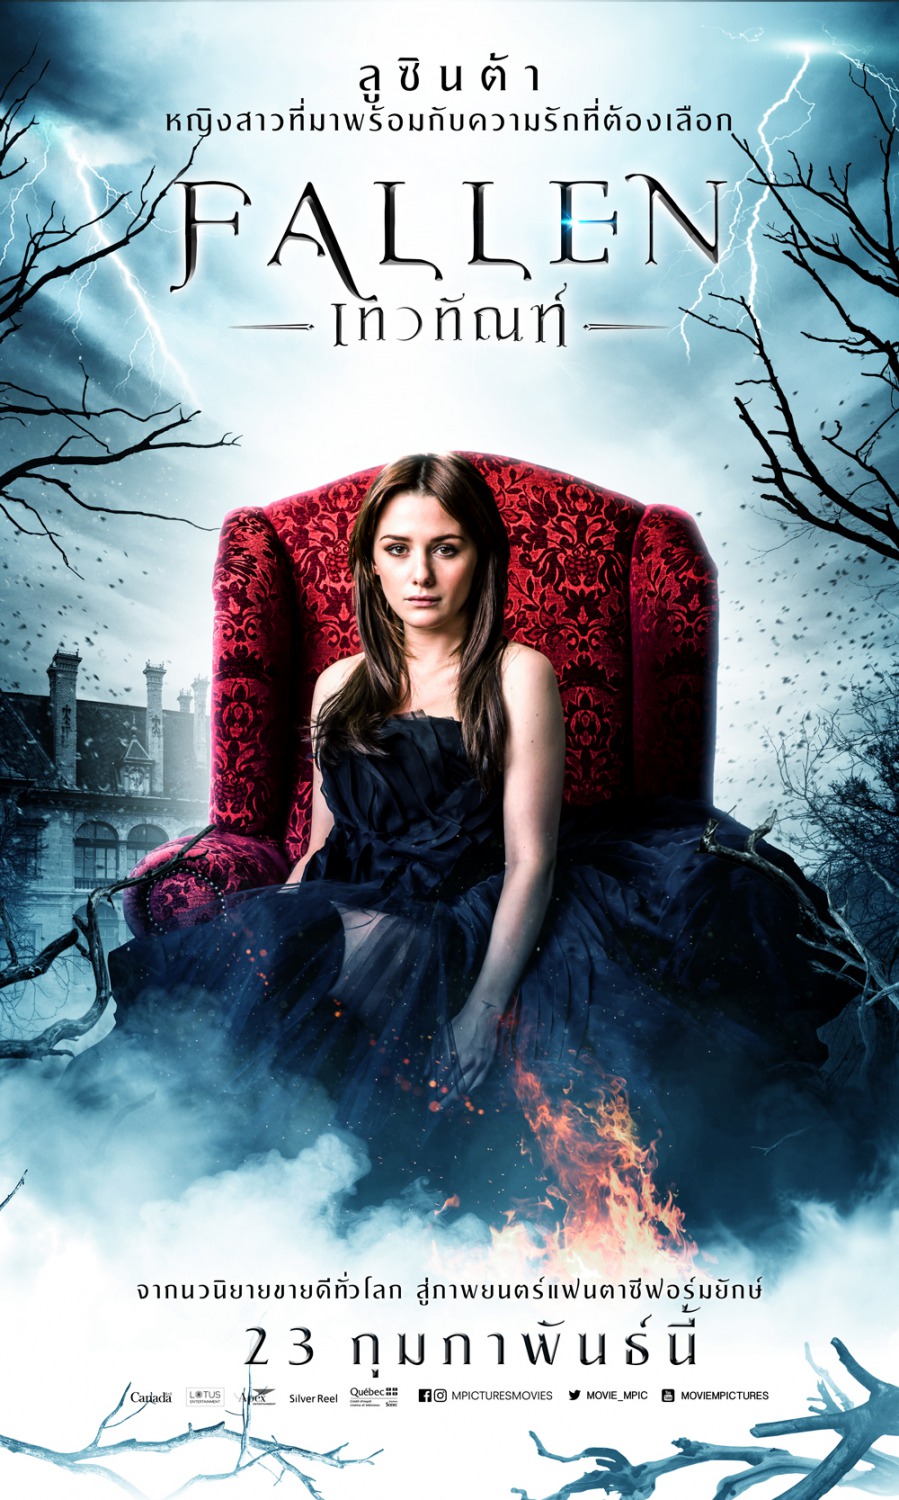 Extra Large Movie Poster Image for Fallen (#2 of 5)